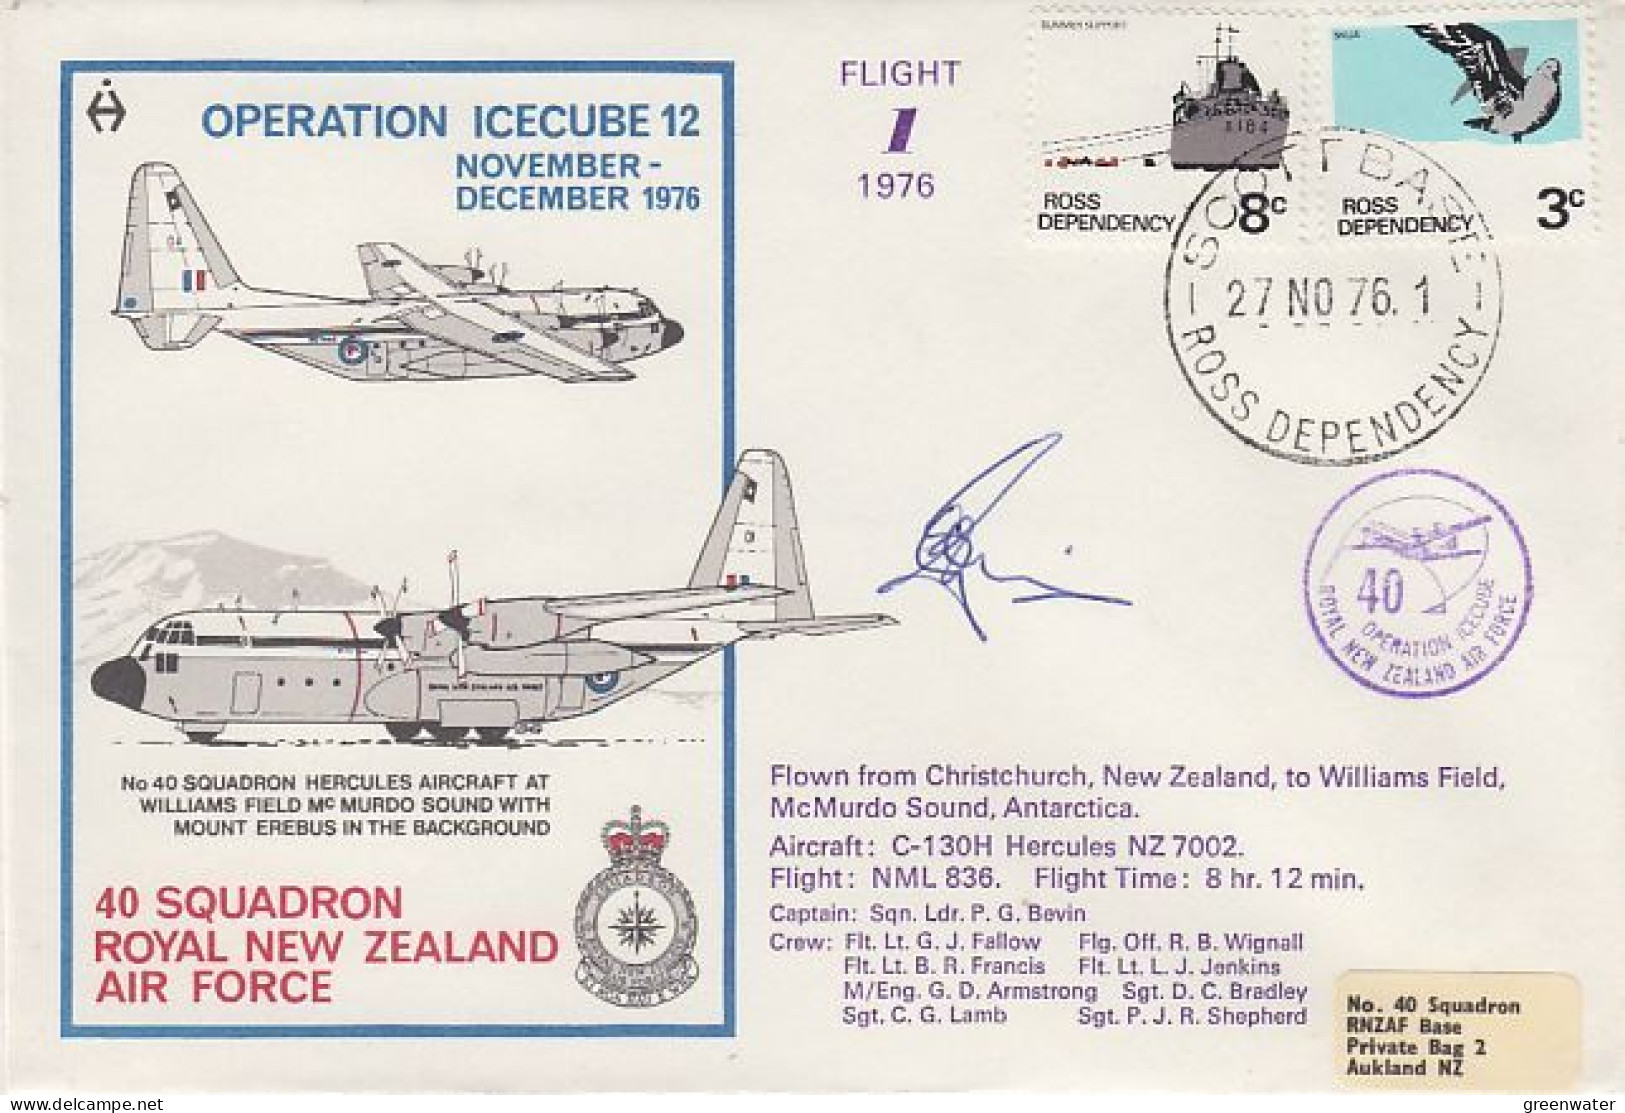 Ross Dependency 1976 Operation Icecube 12 Signature  Ca Scott Base 27 NO 1976 (RO165) - Covers & Documents